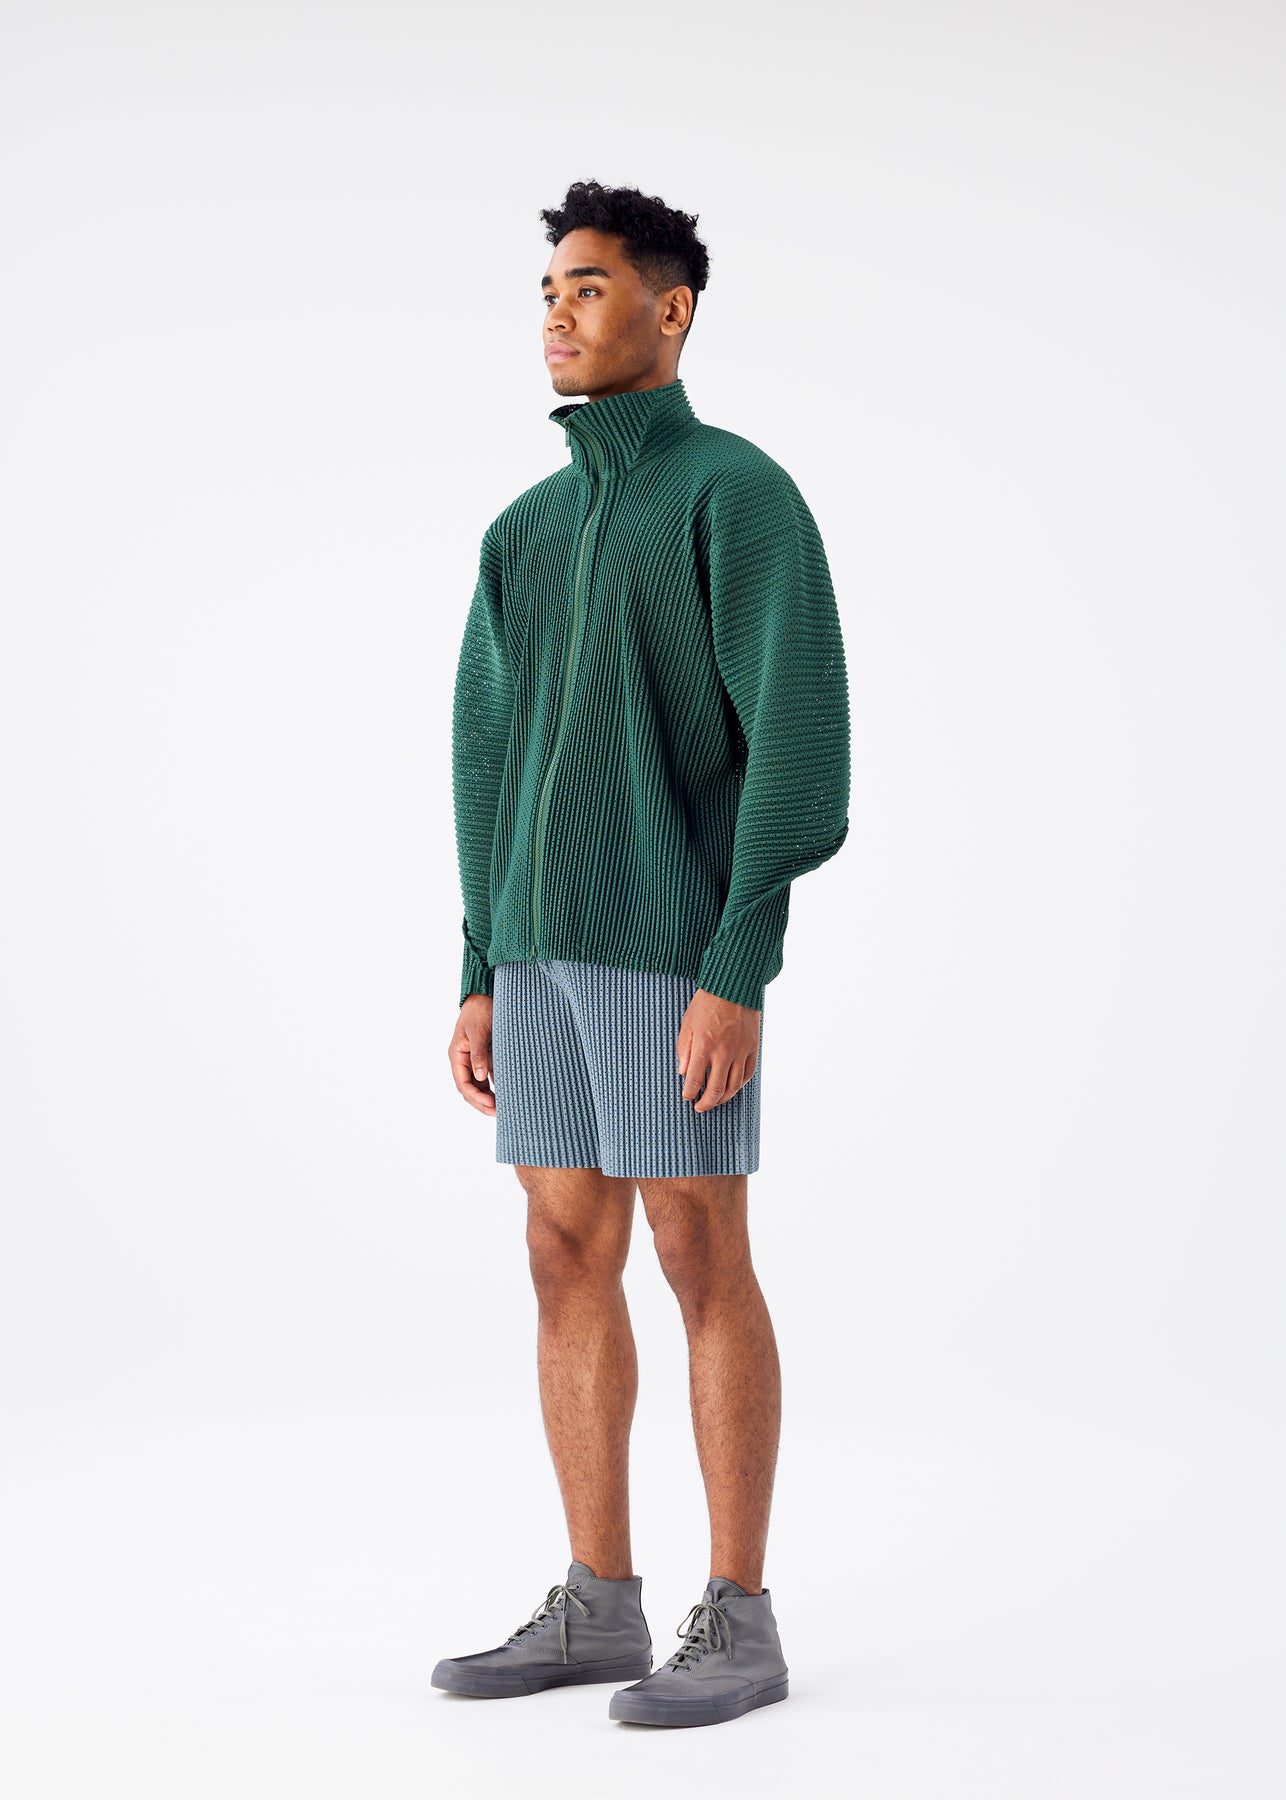 OUTER MESH SHORTS | The official ISSEY MIYAKE ONLINE STORE | ISSEY